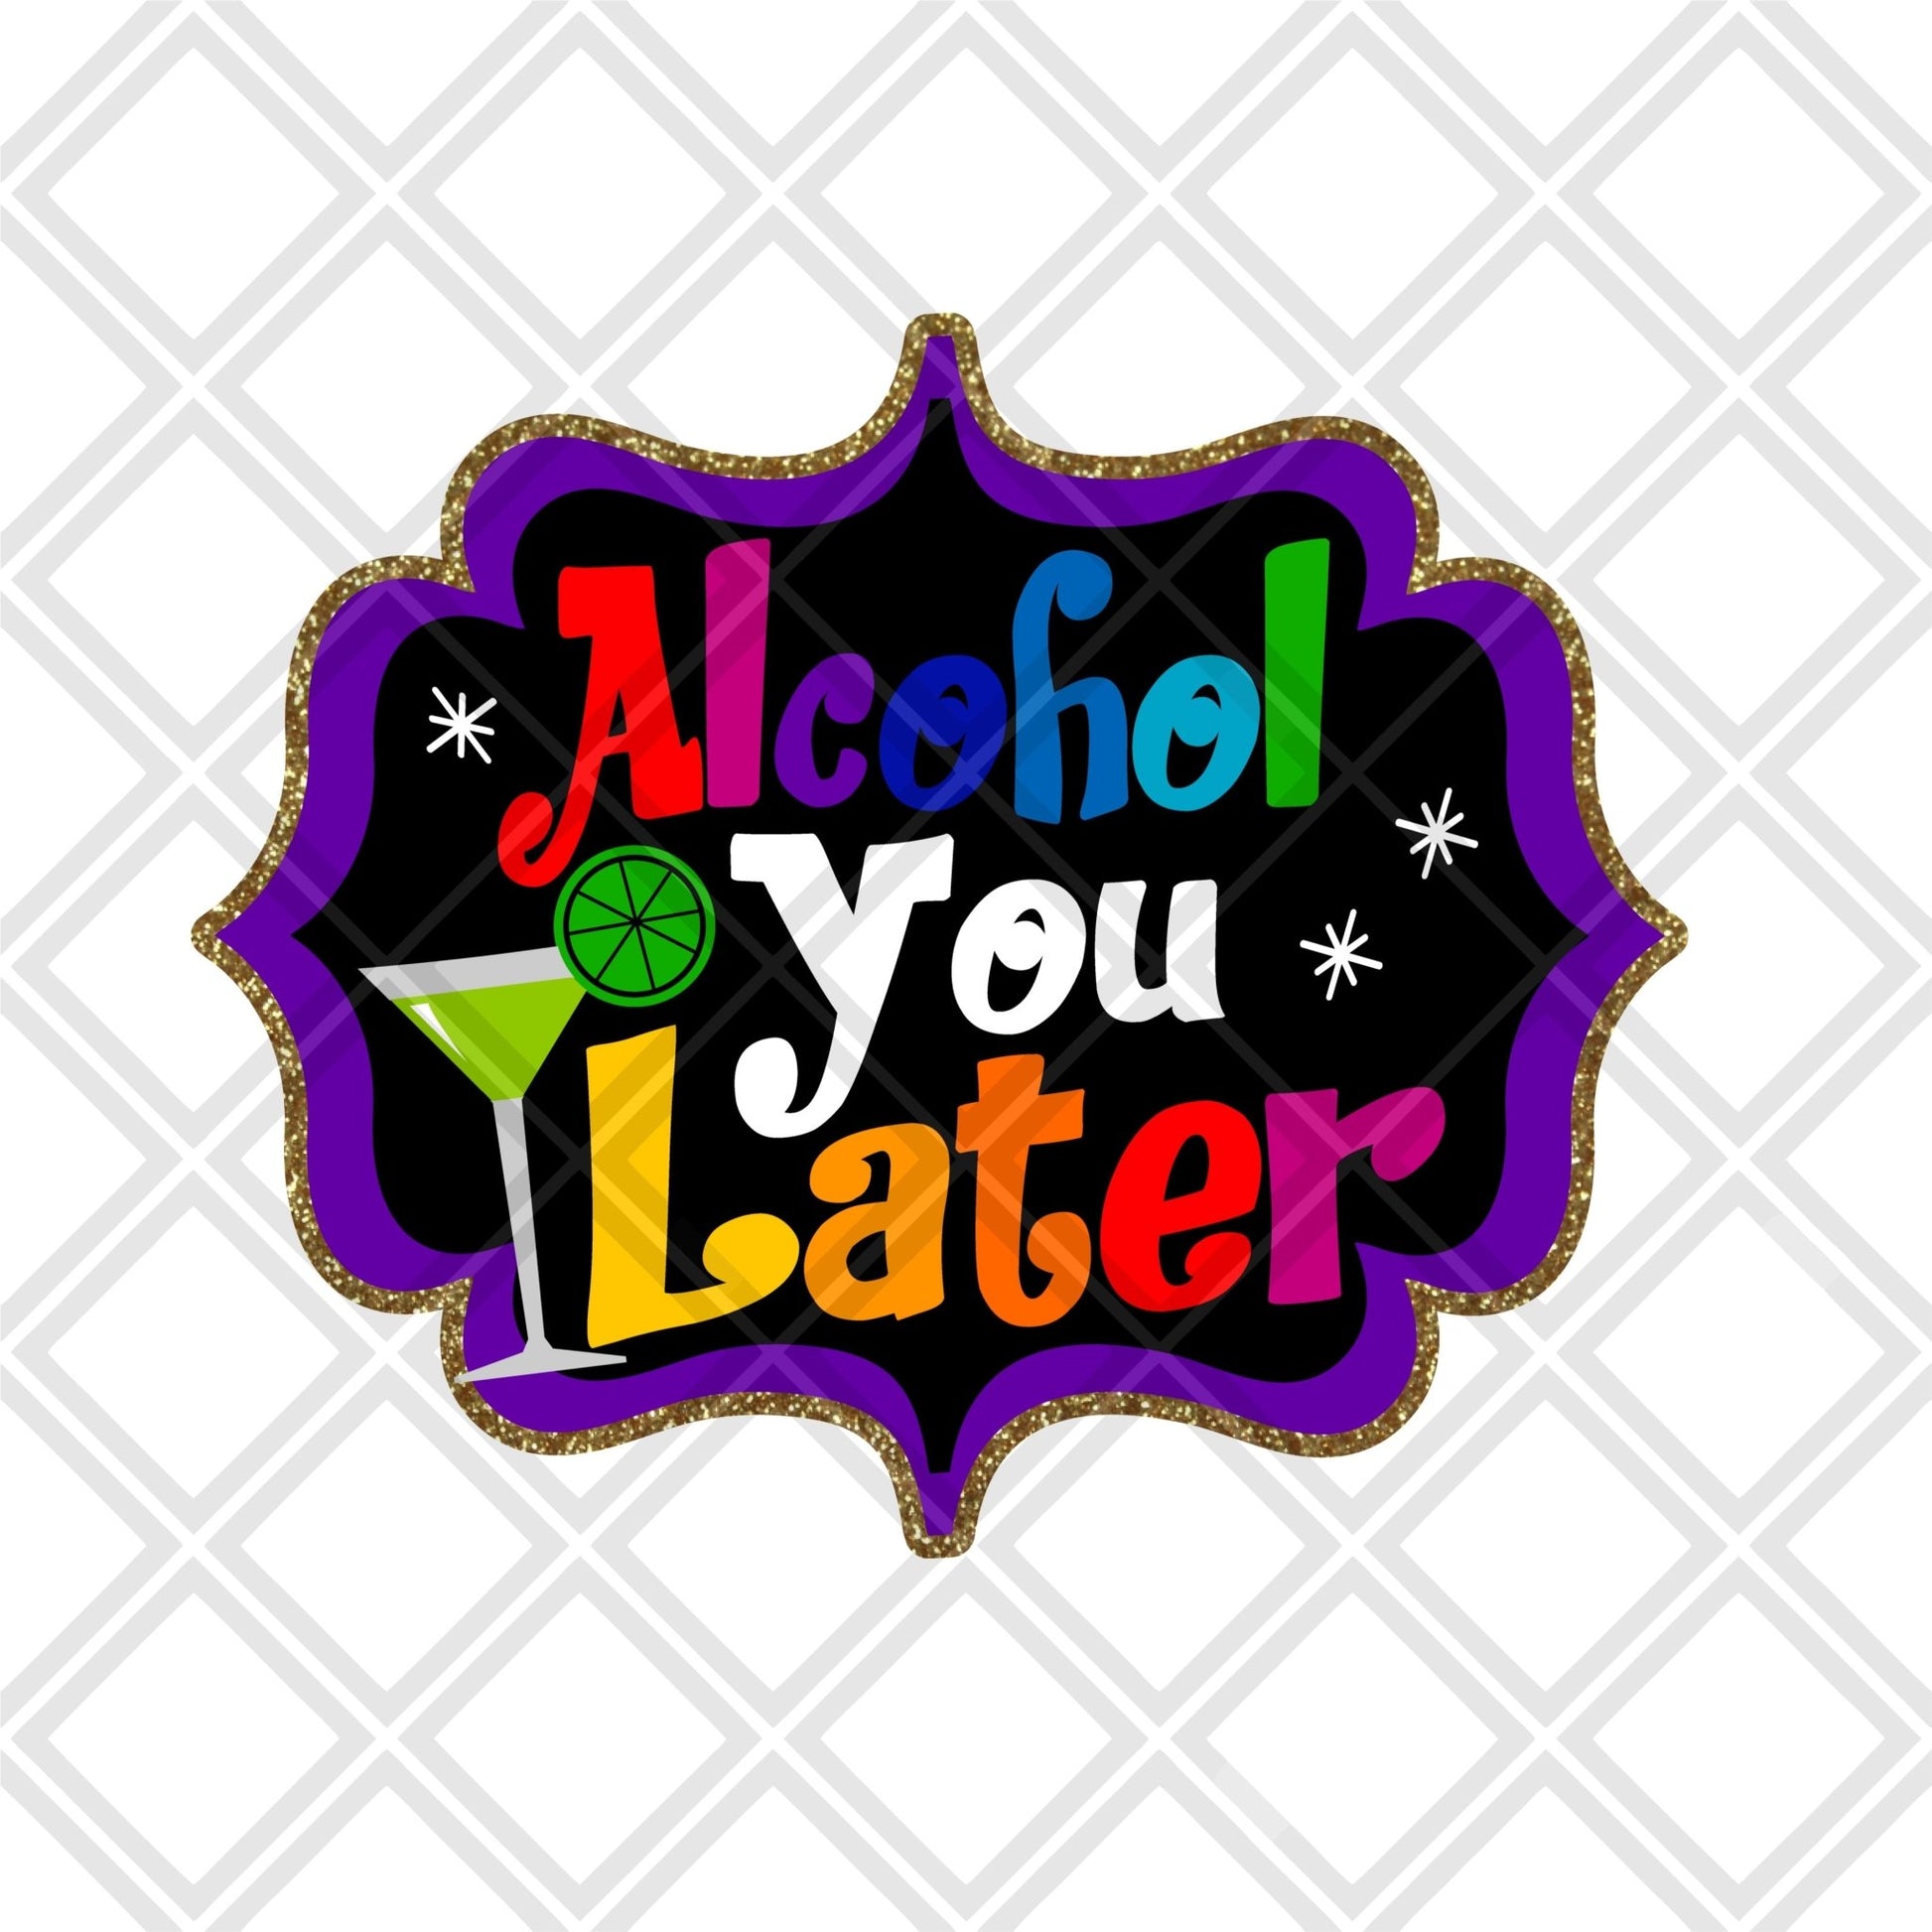 Alcohol You Later DTF TRANSFERSPRINT TO ORDER - Do it yourself Transfers